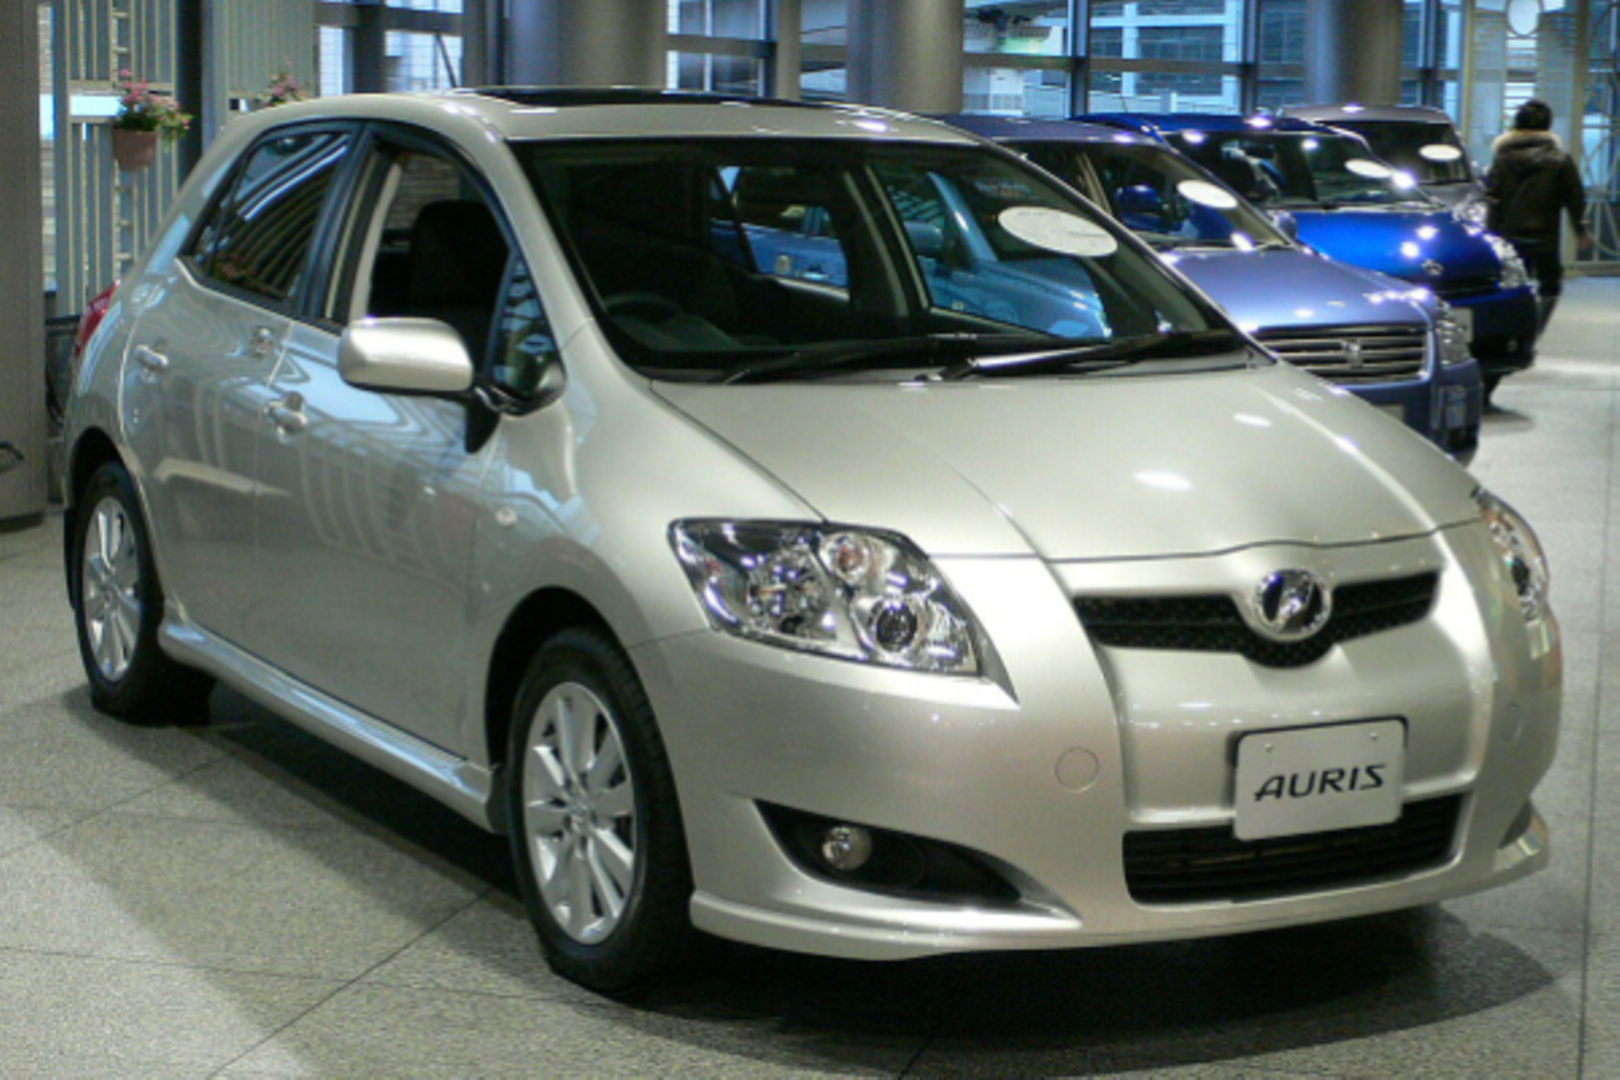 Auris is fuel efficient, stable on the road